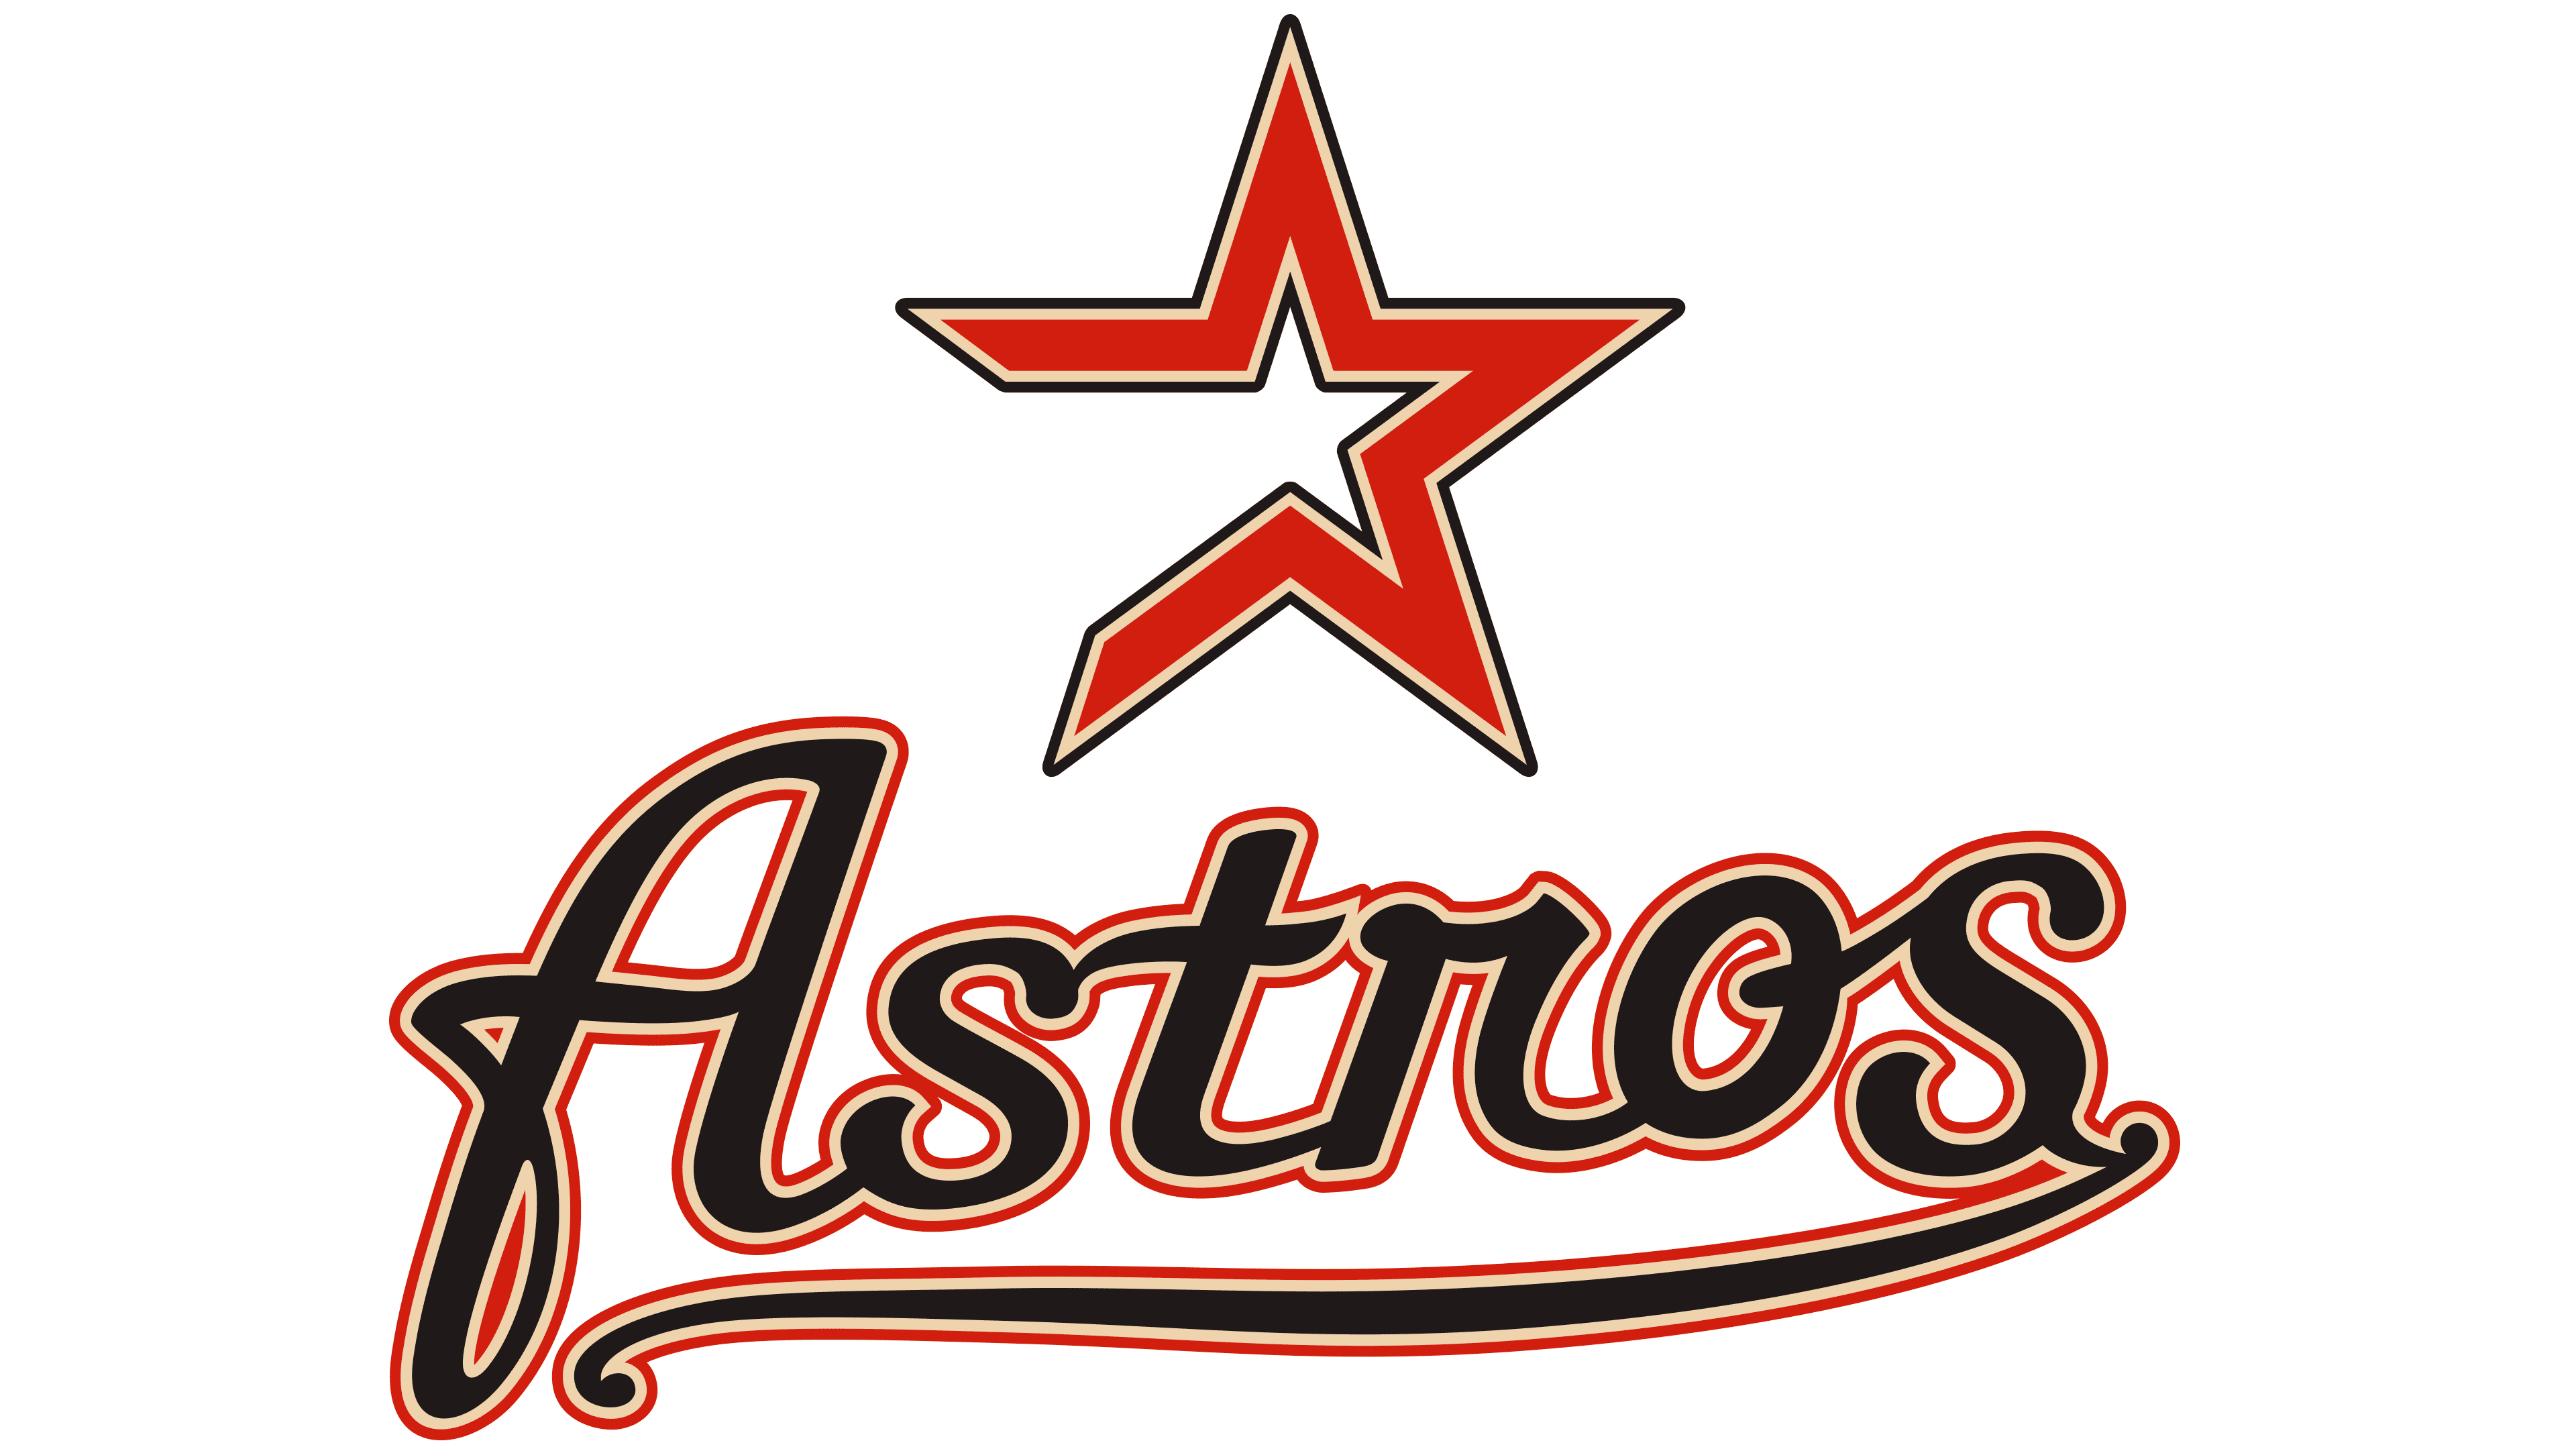 Houston Astros Logo Symbol Meaning History Png Brand